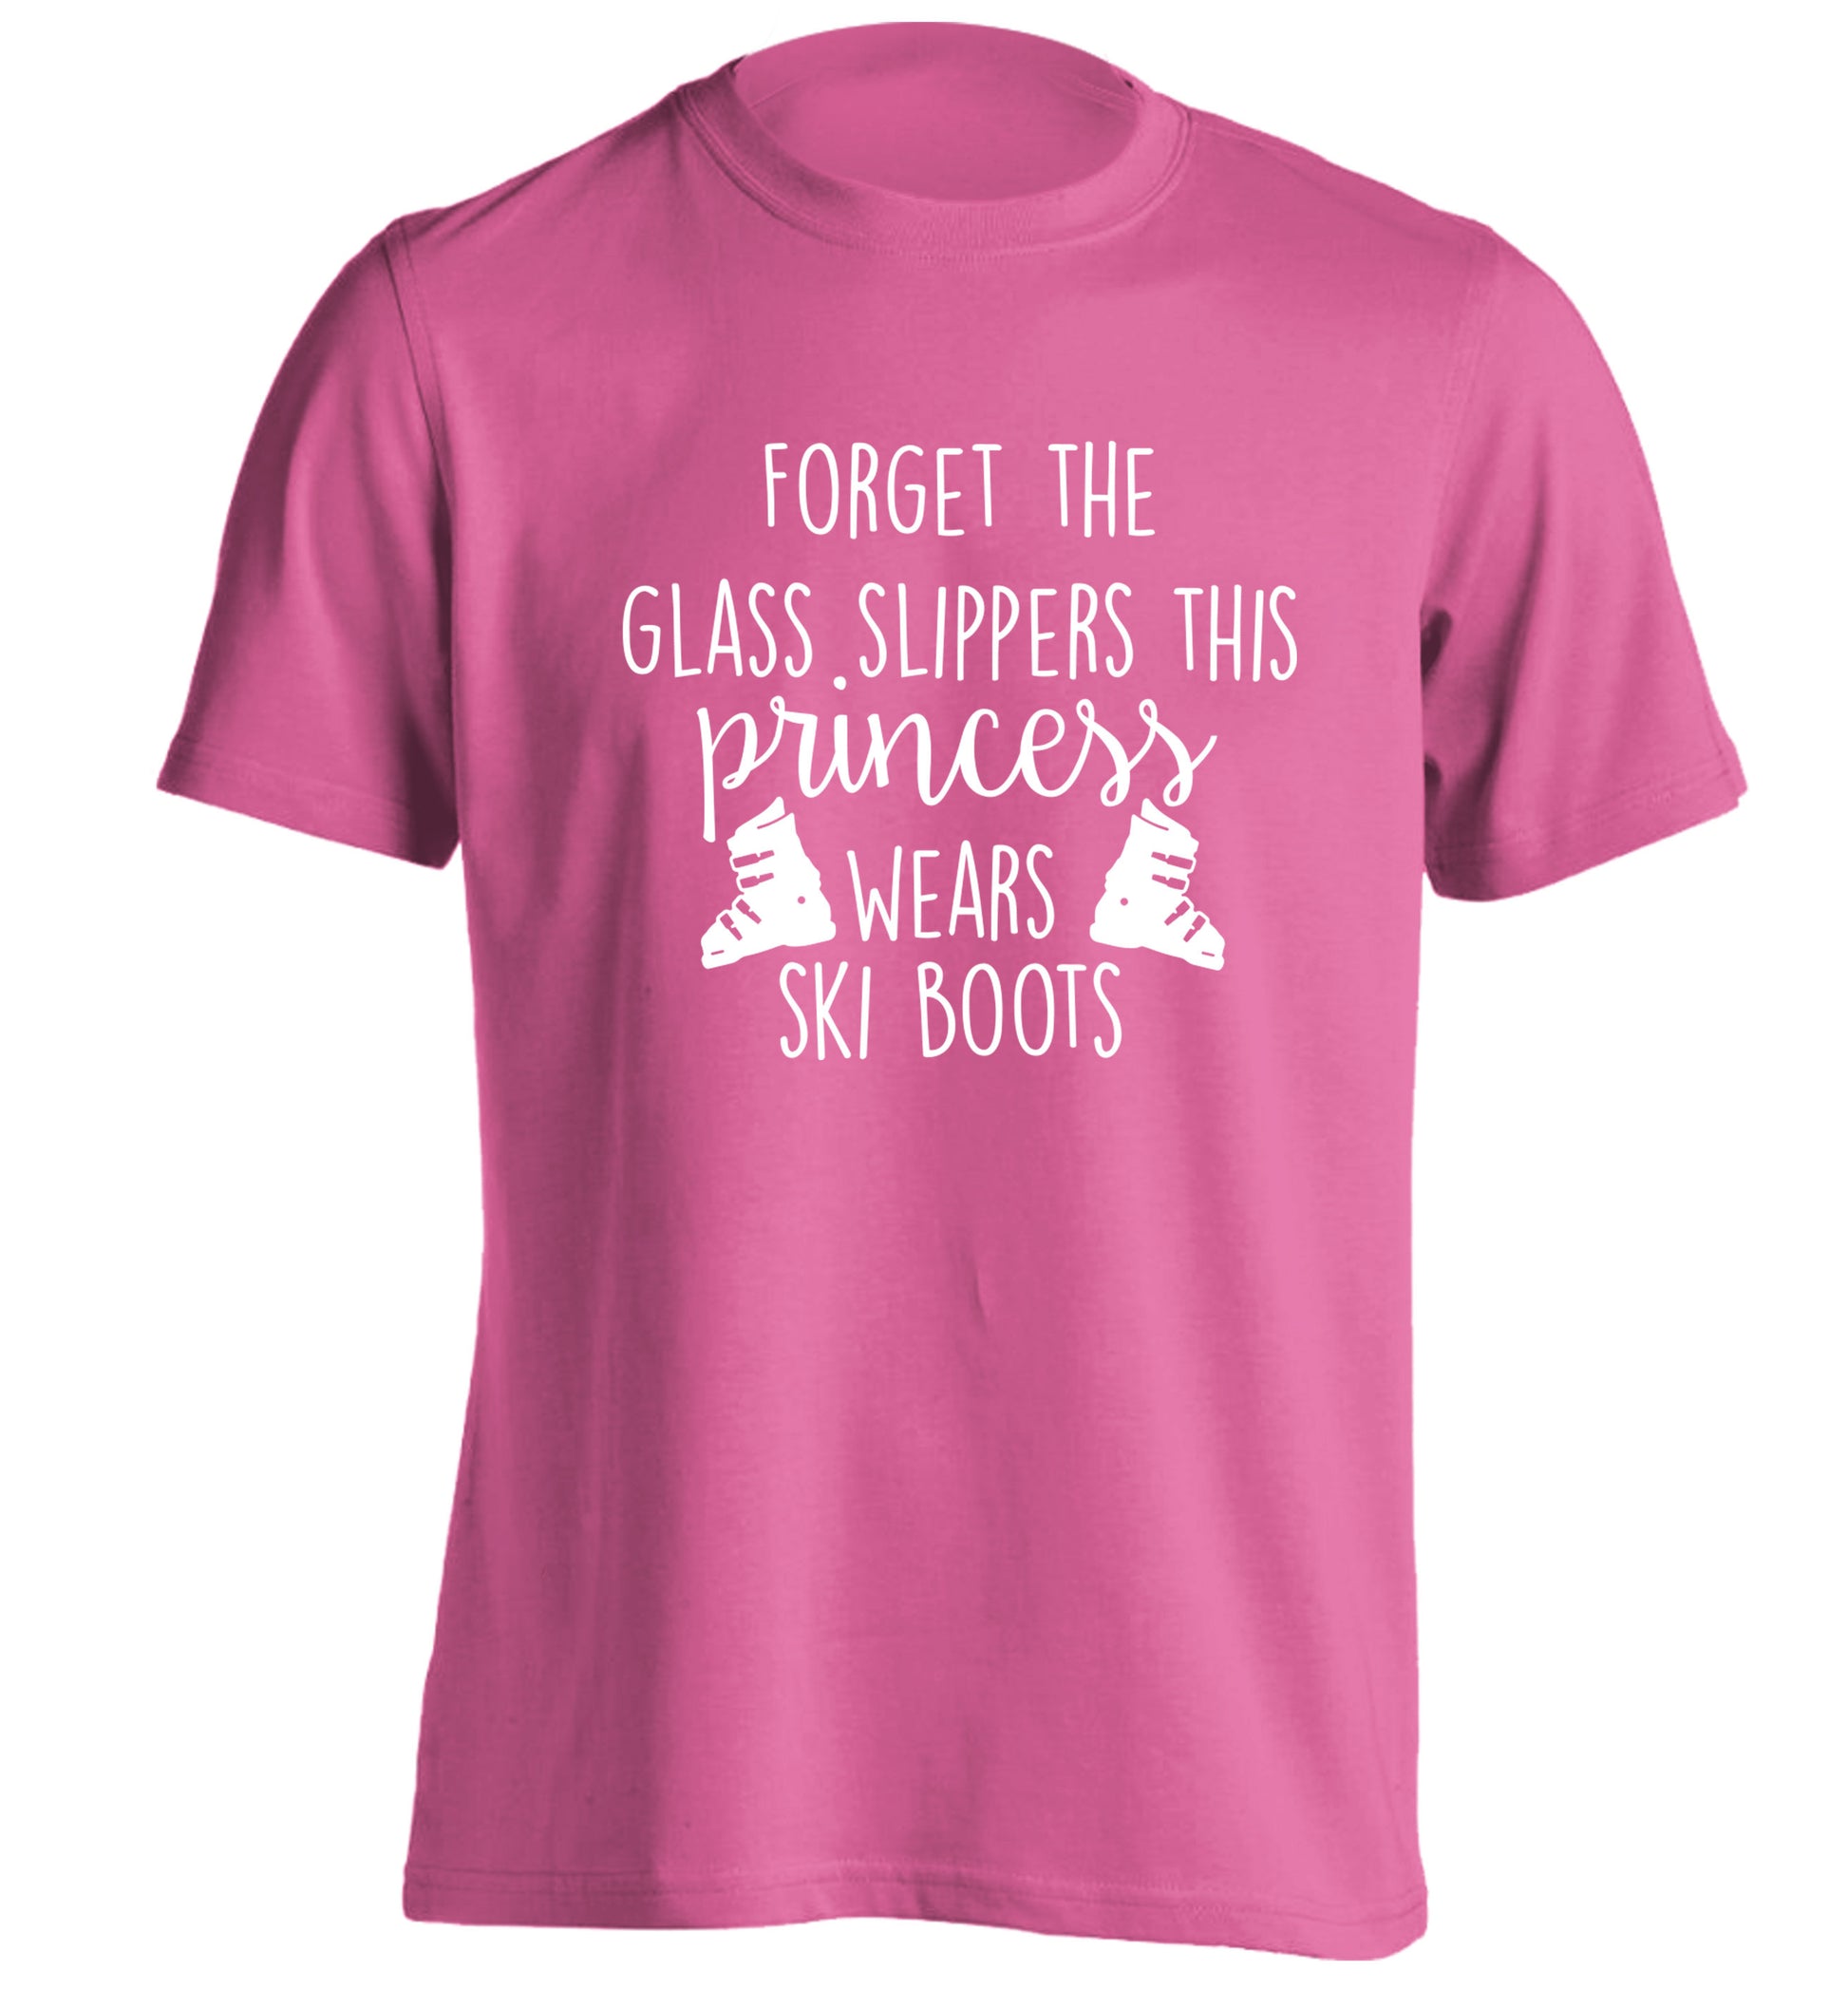 Forget the glass slippers this princess wears ski boots adults unisex pink Tshirt 2XL